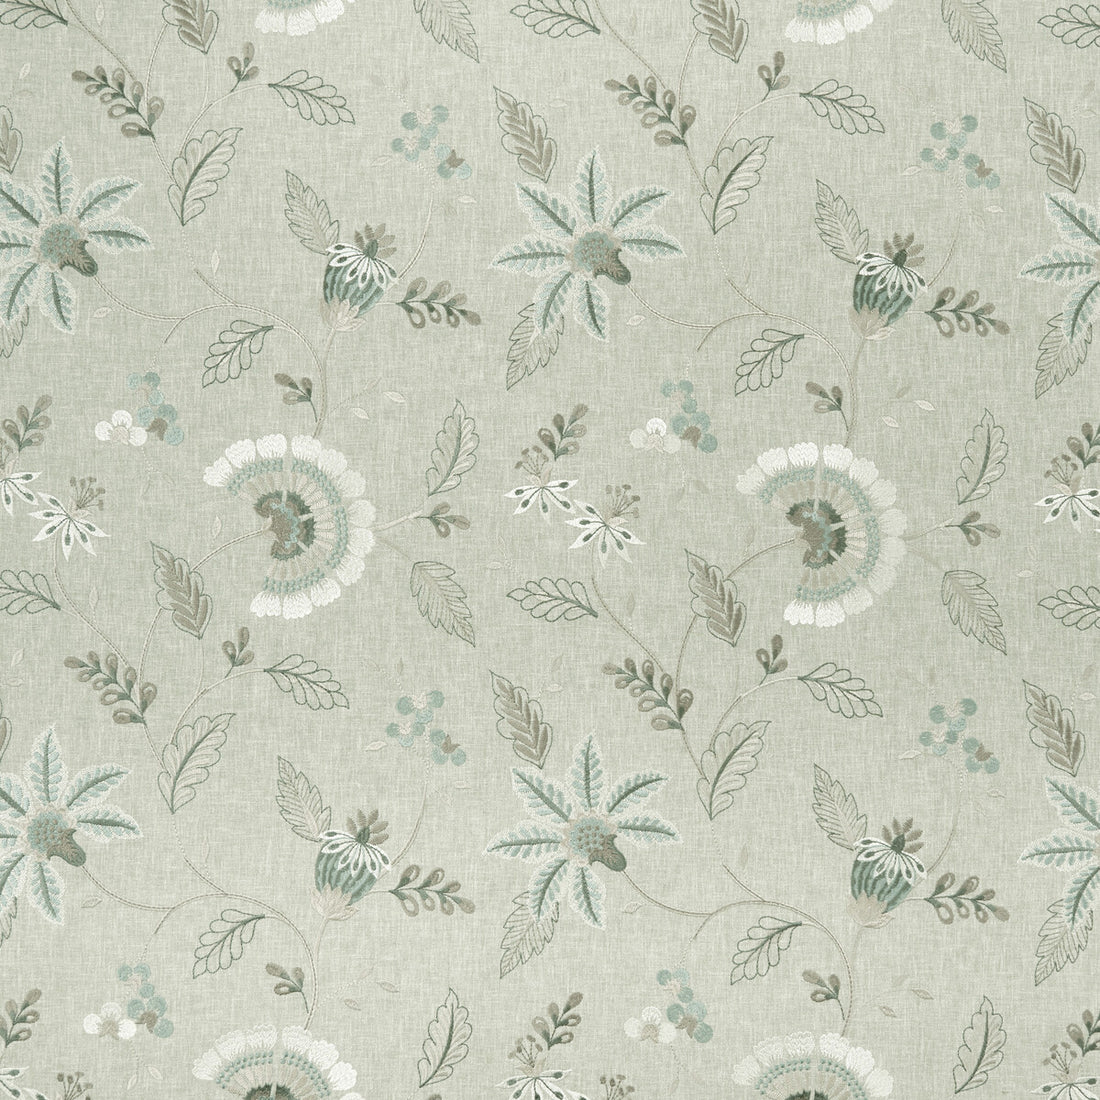 Delamere fabric in duckegg color - pattern F1004/02.CAC.0 - by Clarke And Clarke in the Clarke &amp; Clarke Halcyon collection